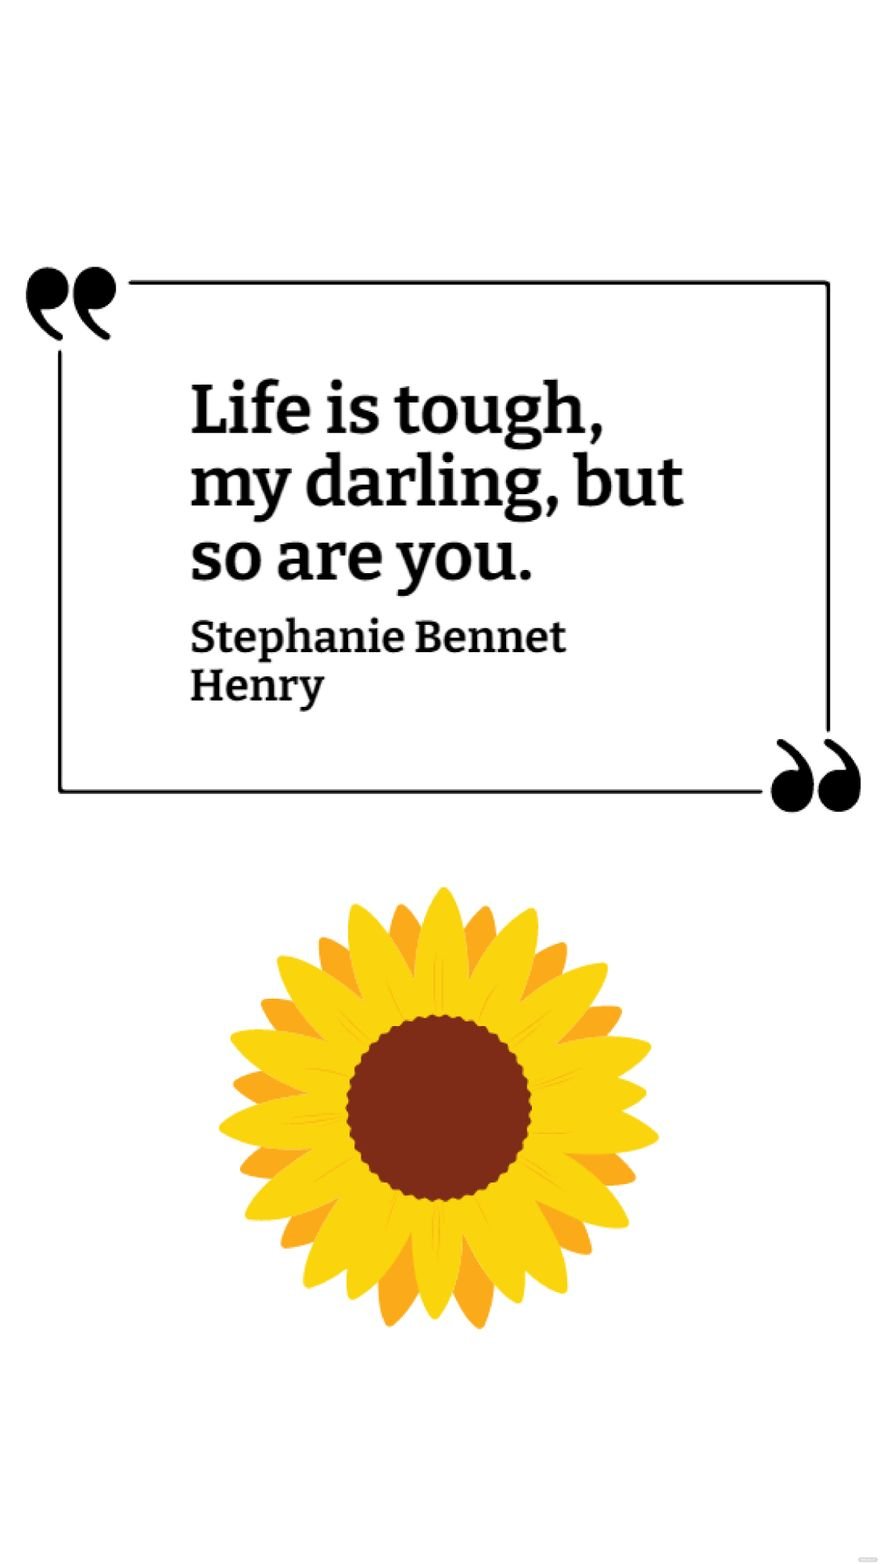 Stephanie Bennet Henry - Life is tough, my darling, but so are you.